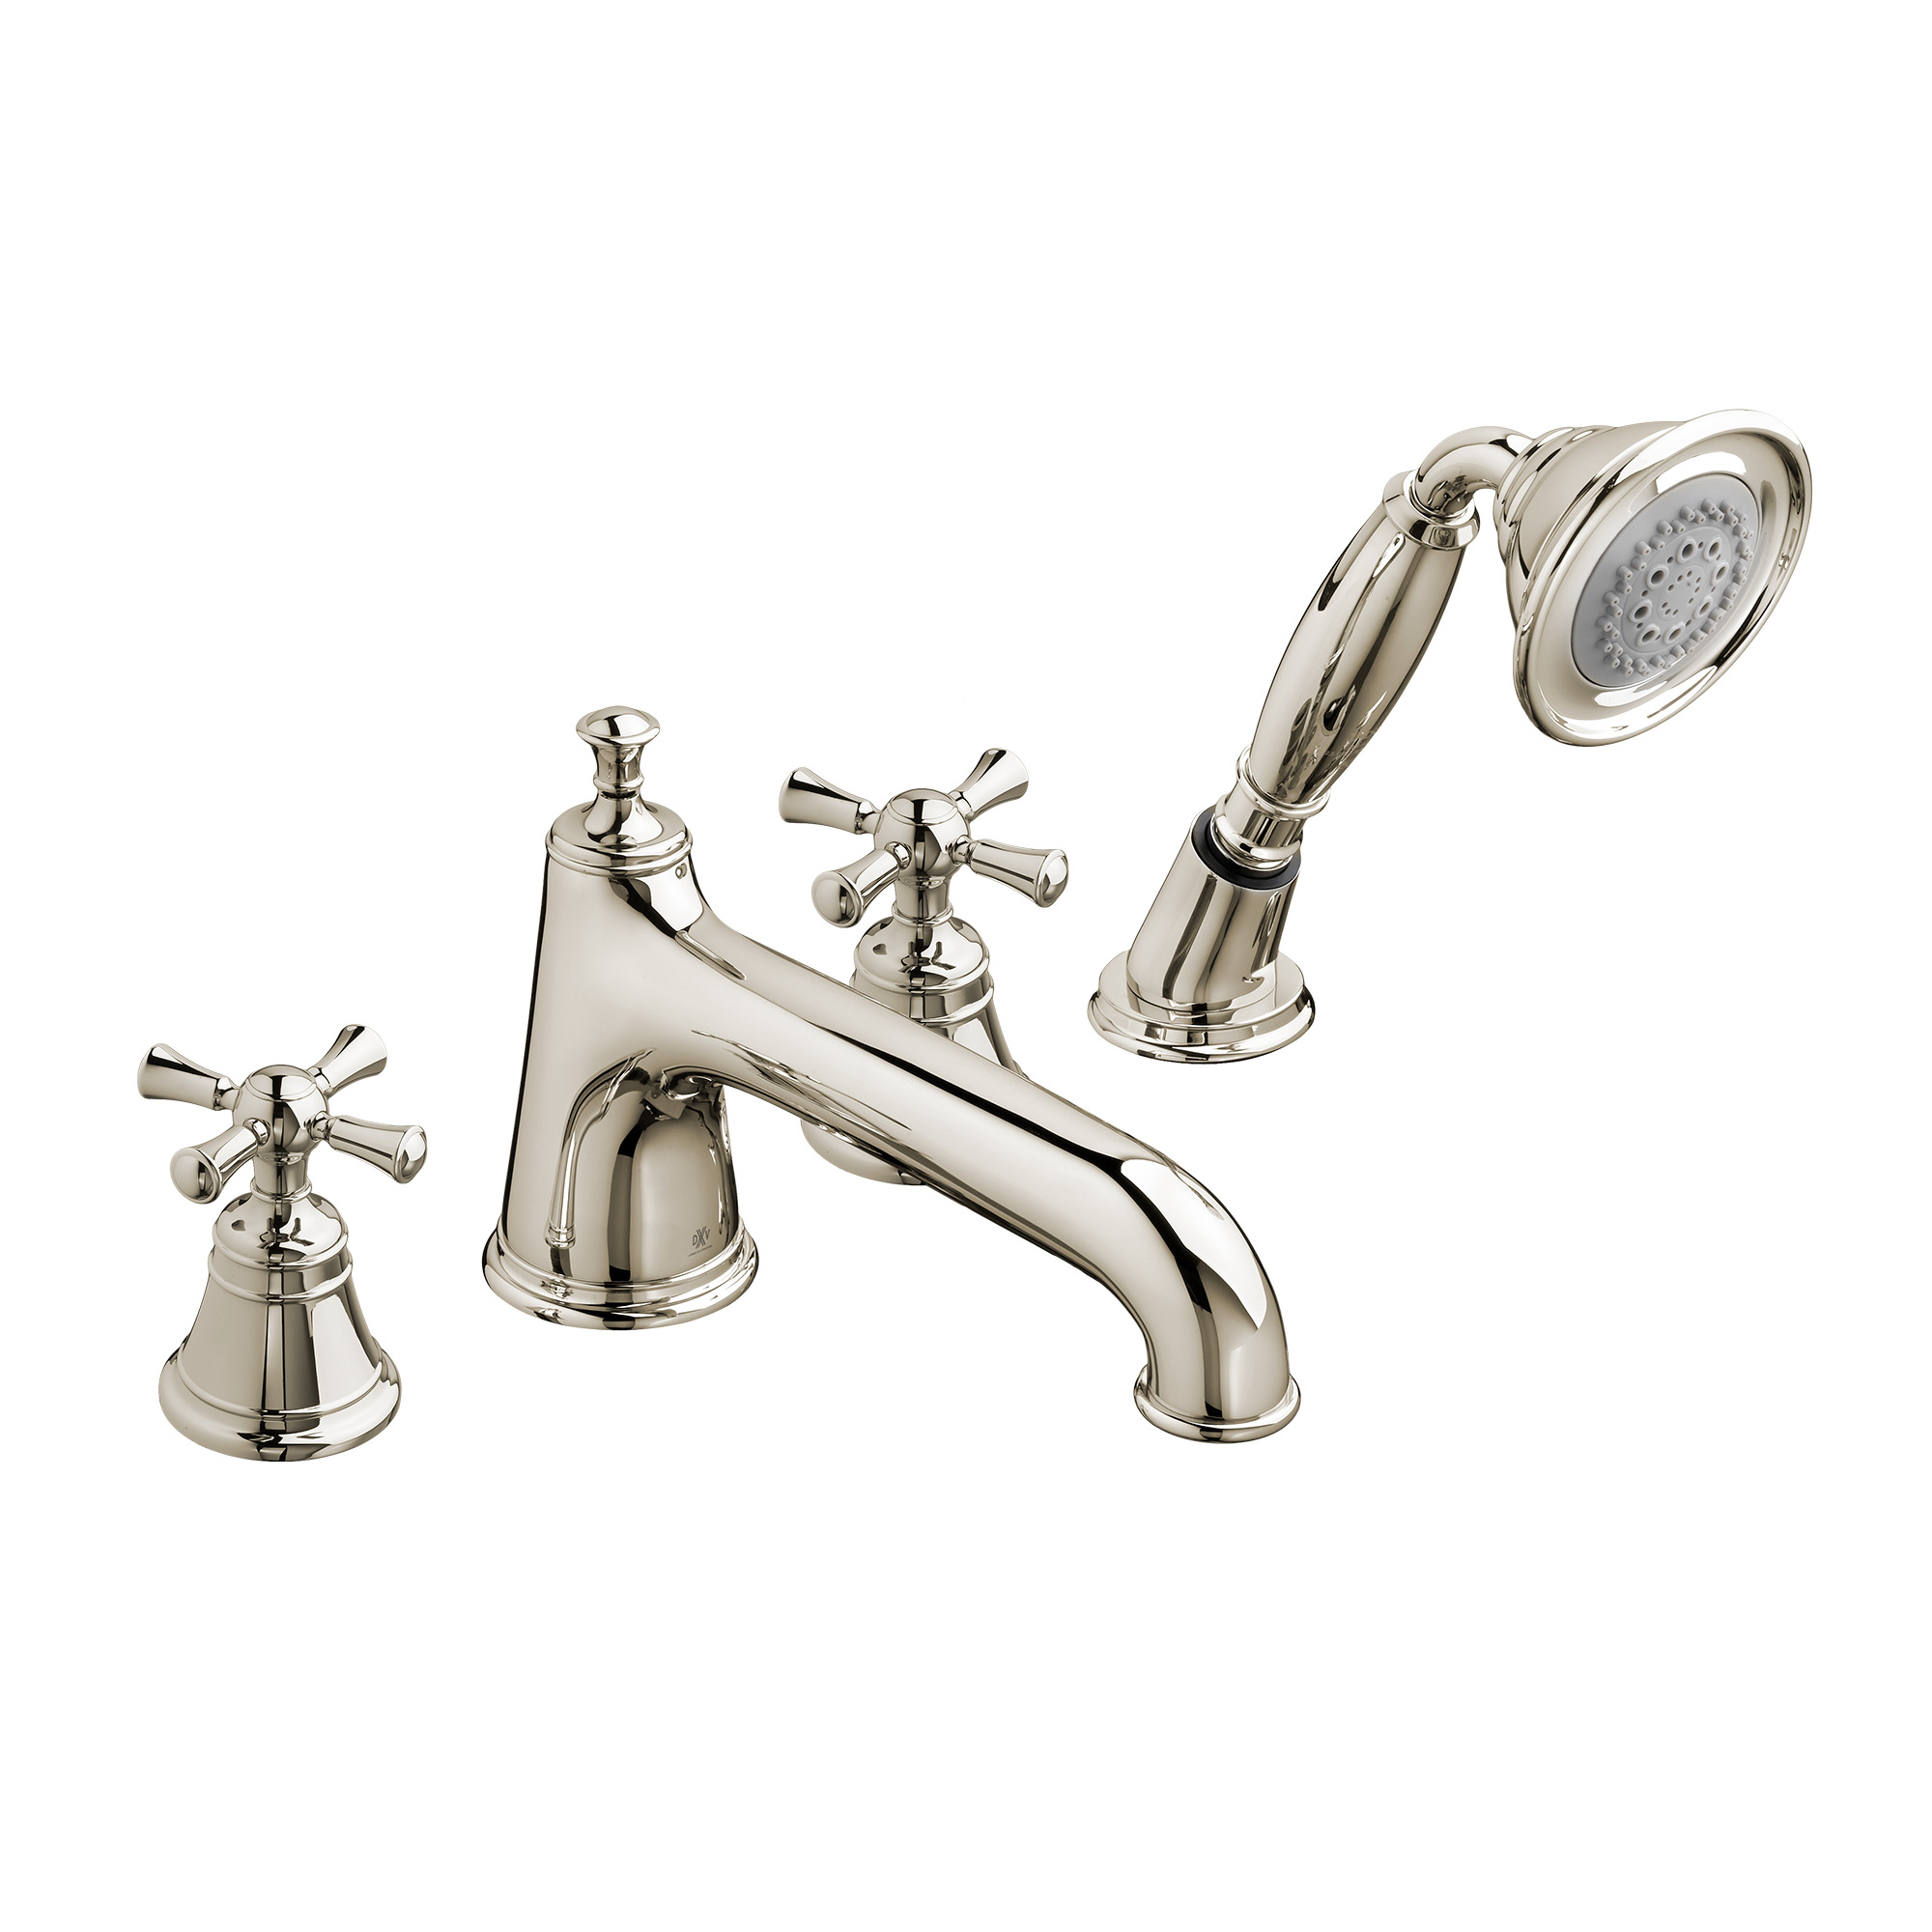 Randall 2-Handle Deck Mount Bathtub Faucet with Hand Shower and Cross Handles